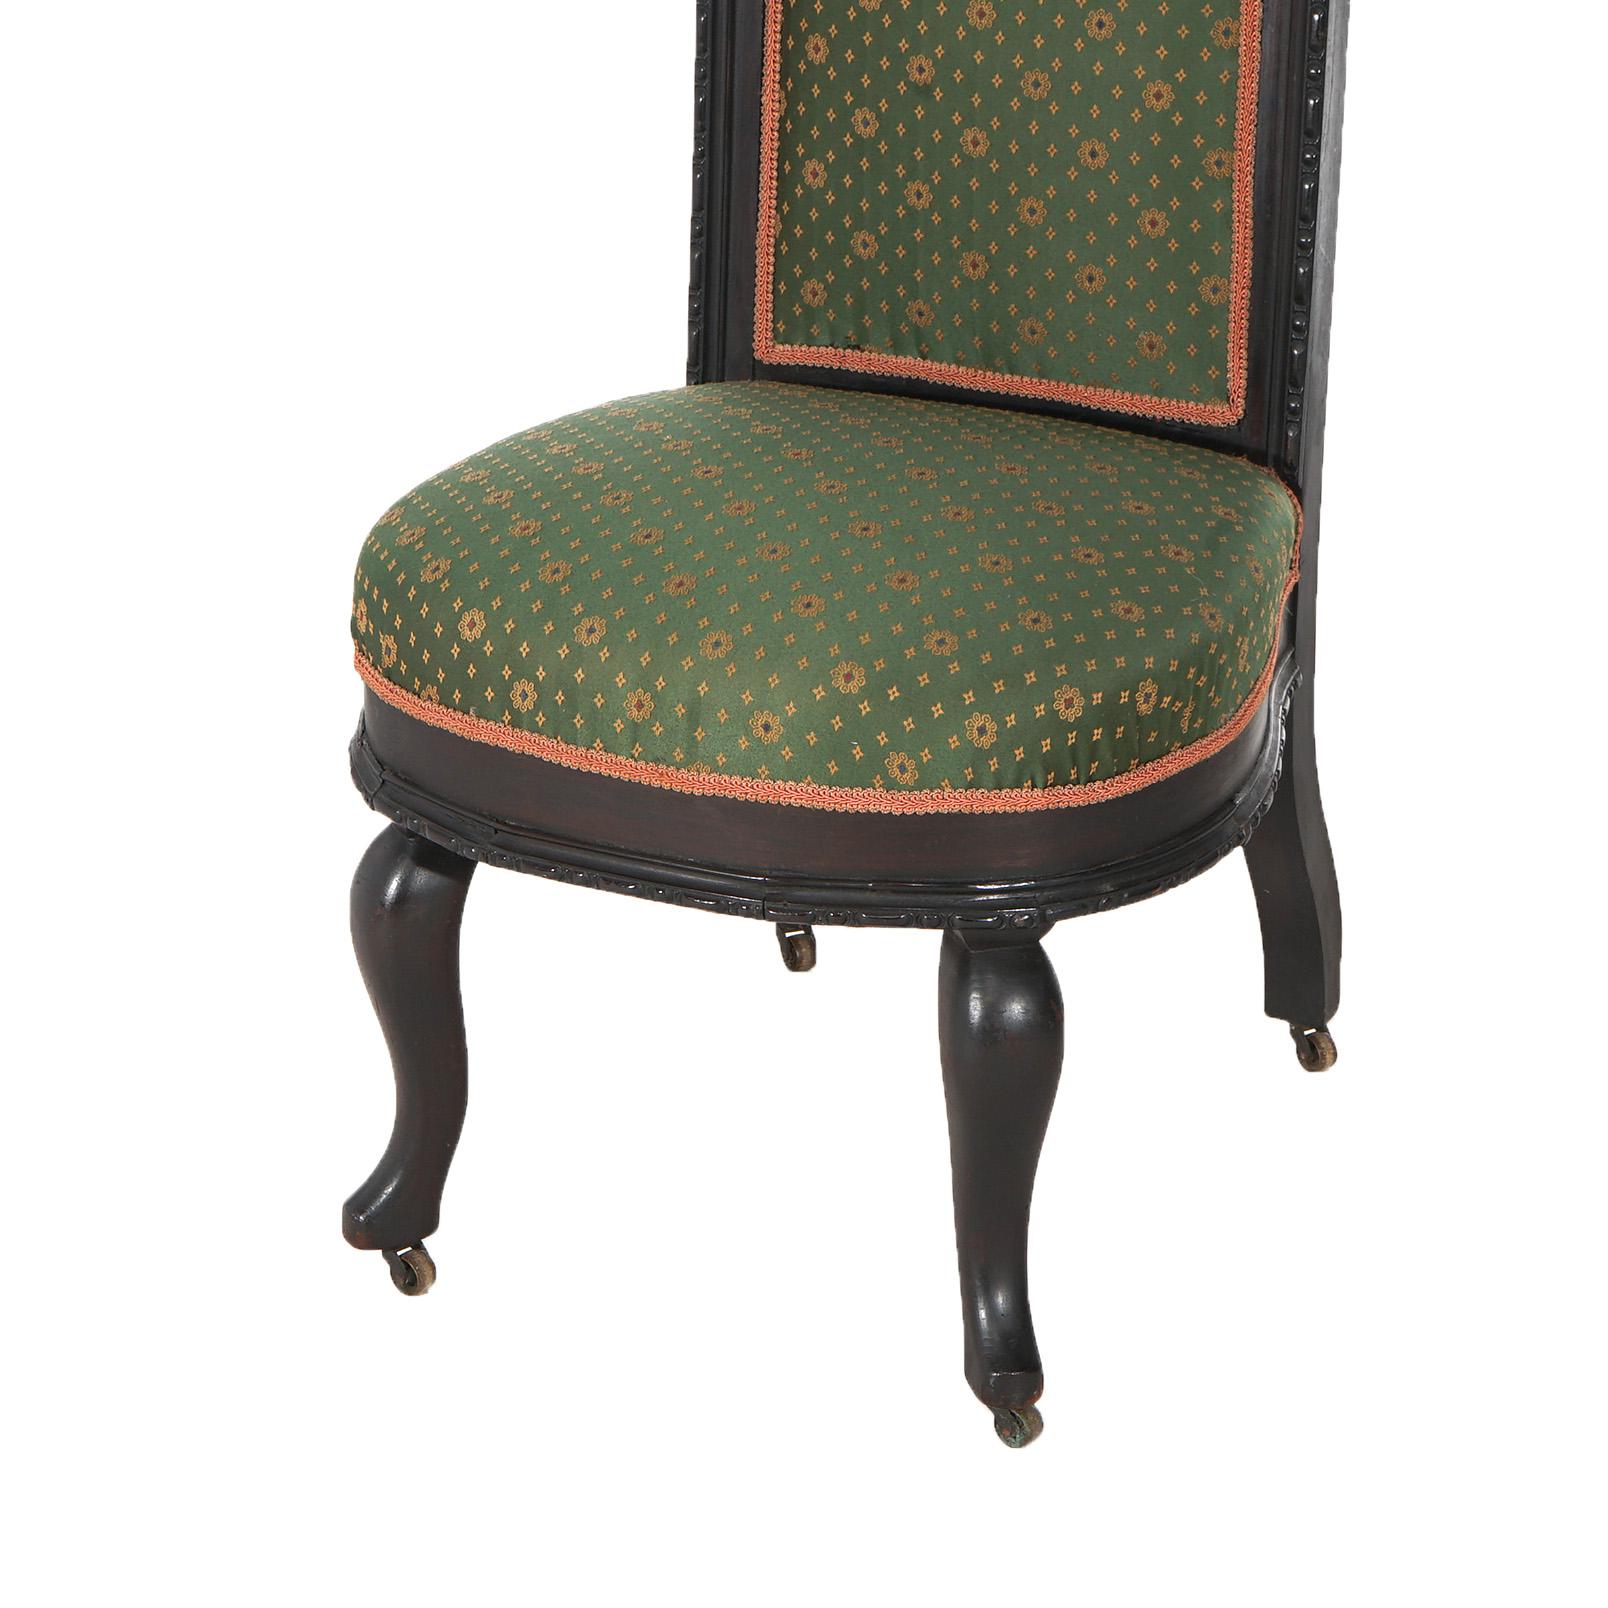 19th Century Antique Gothic Revival Ebonized & Carved Walnut Upholstered Throne Chair C1860 For Sale